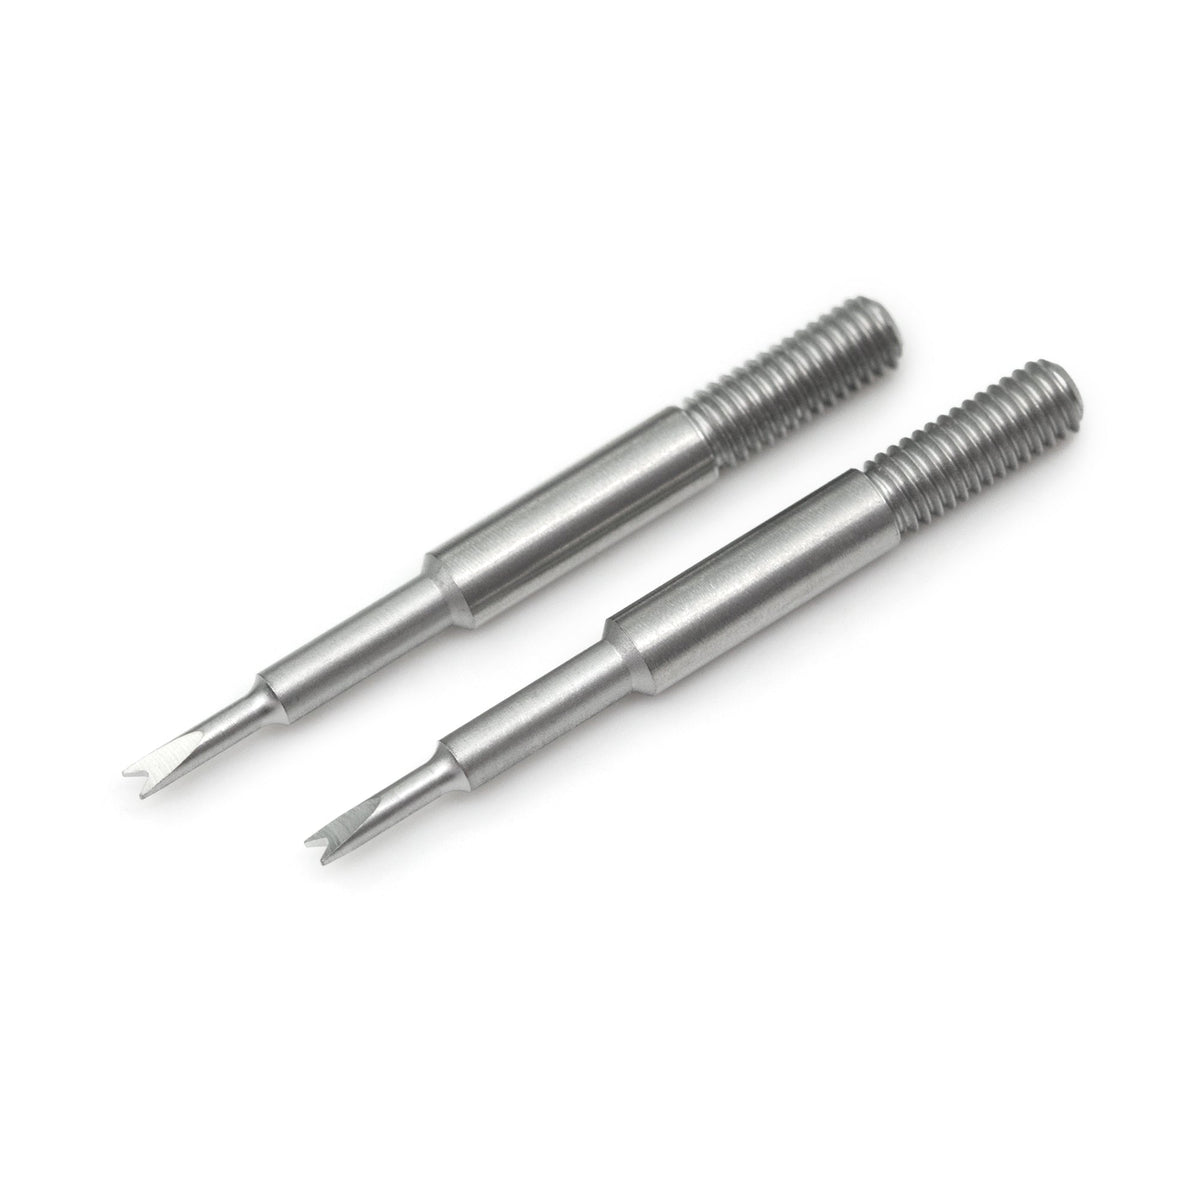 2 pieces of Changeable Forks 1.20mm (for Swiss Bergeon 6767-F spring bar tool)